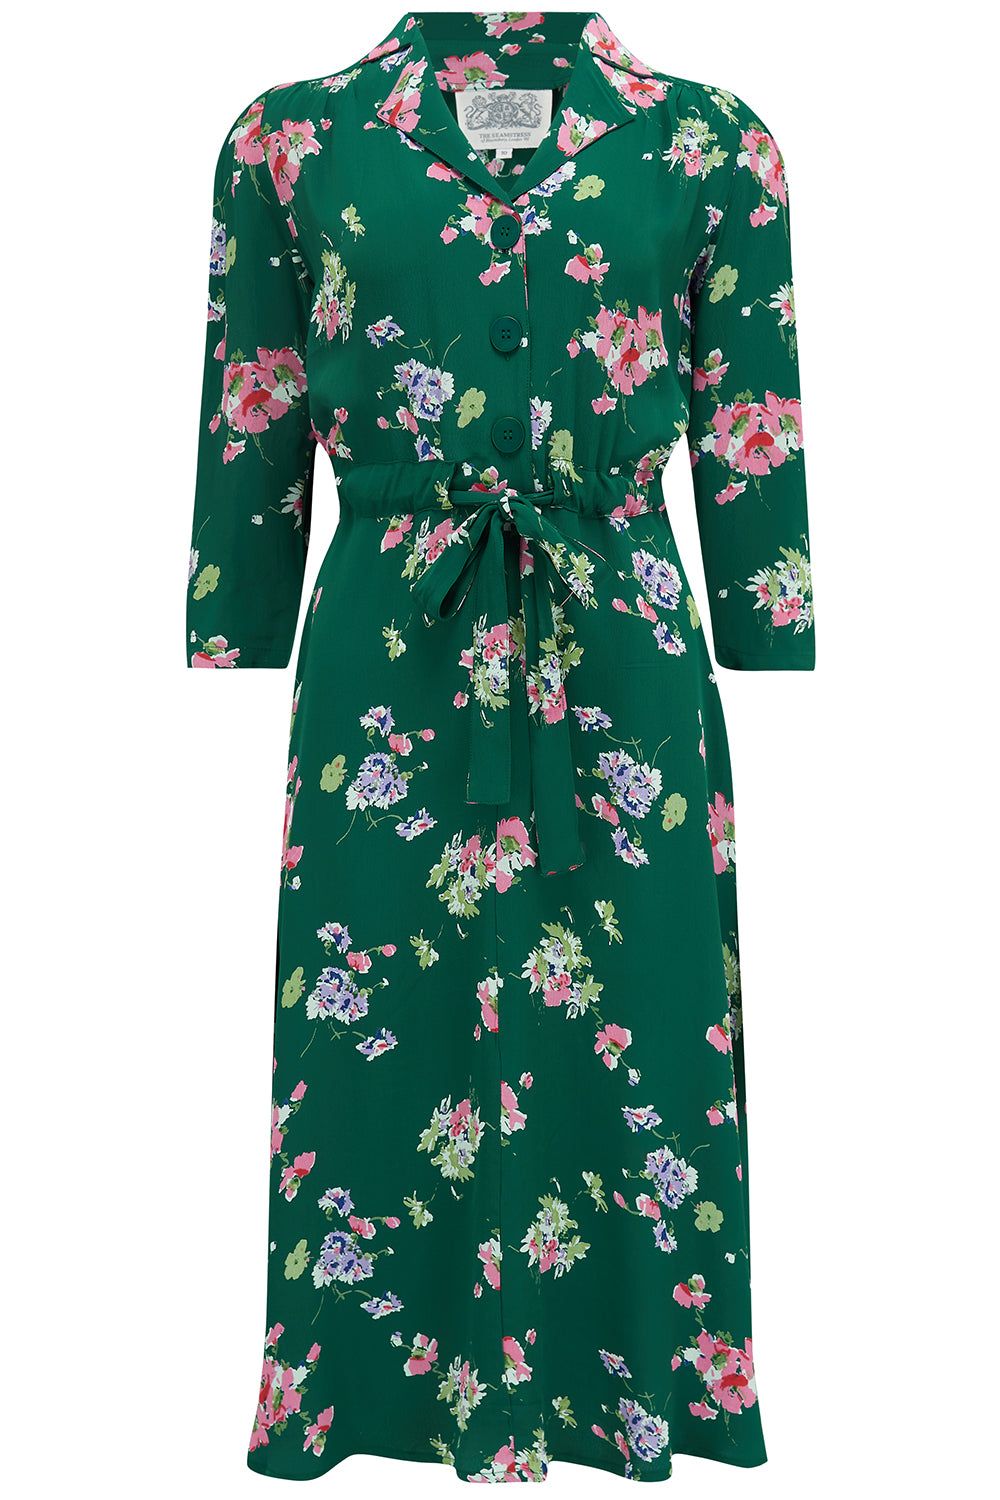 1940s Day Dress Styles, House Dresses Milly dress in Green Mayflower  A Classic 1940s Inspired Day dress True Vintage Style £79.95 AT vintagedancer.com